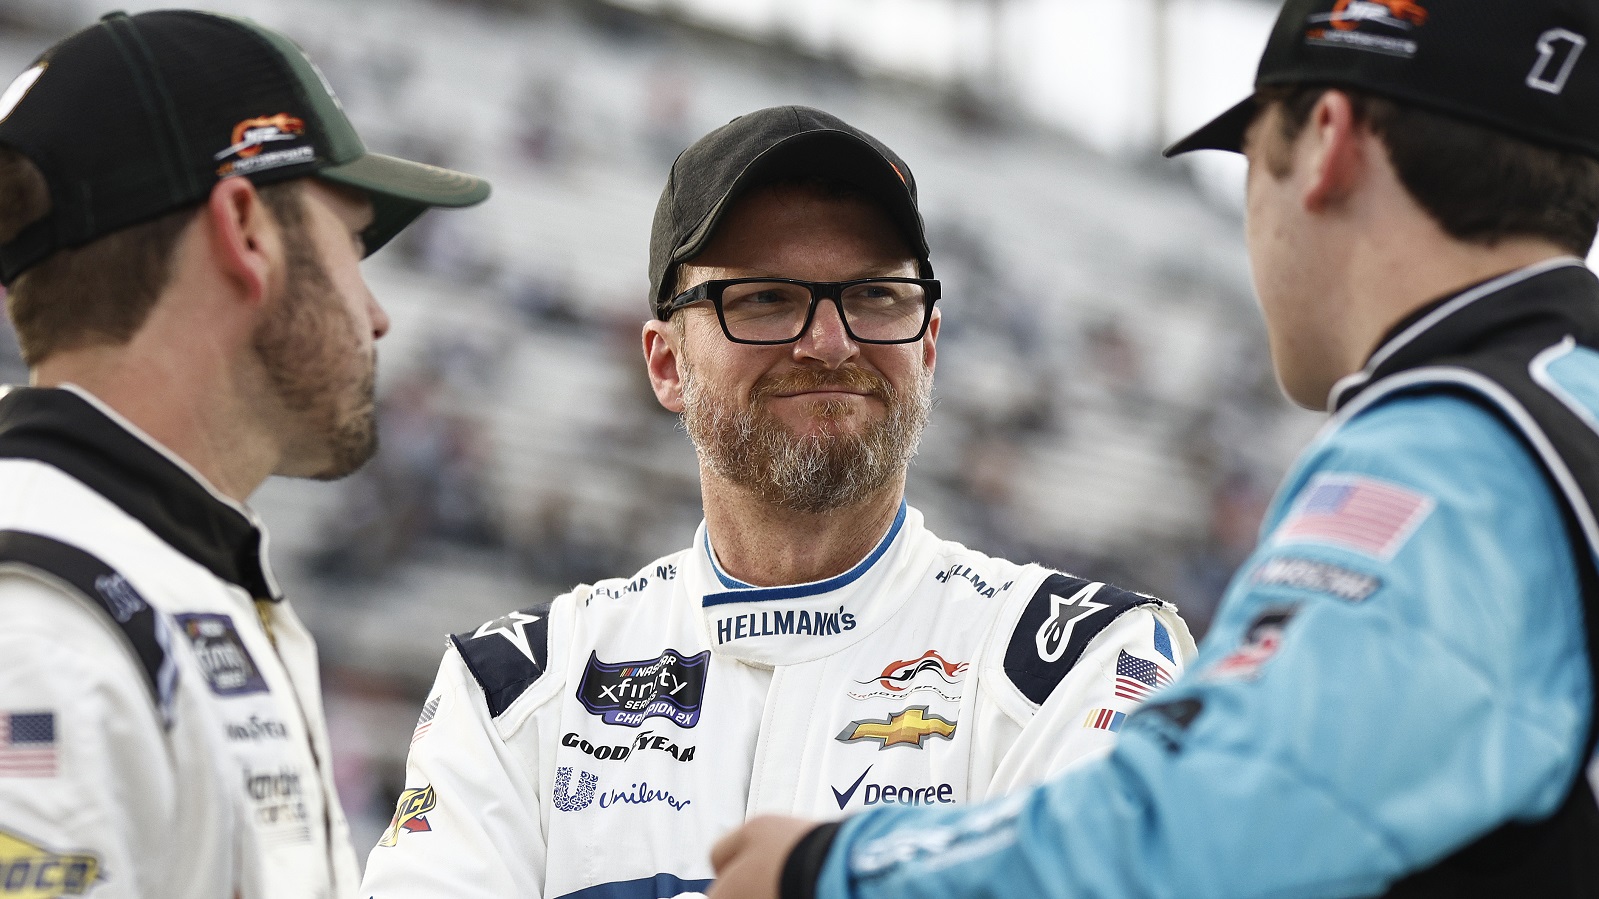 Dale Earnhardt Jr., center, speaks with Josh Berry and Sam Mayer on the grid during qualifying for the NASCAR Xfinity Series  Call 811 Before You Dig 250 at Martinsville Speedway on April 7, 2022. | Jared C. Tilton/Getty Images